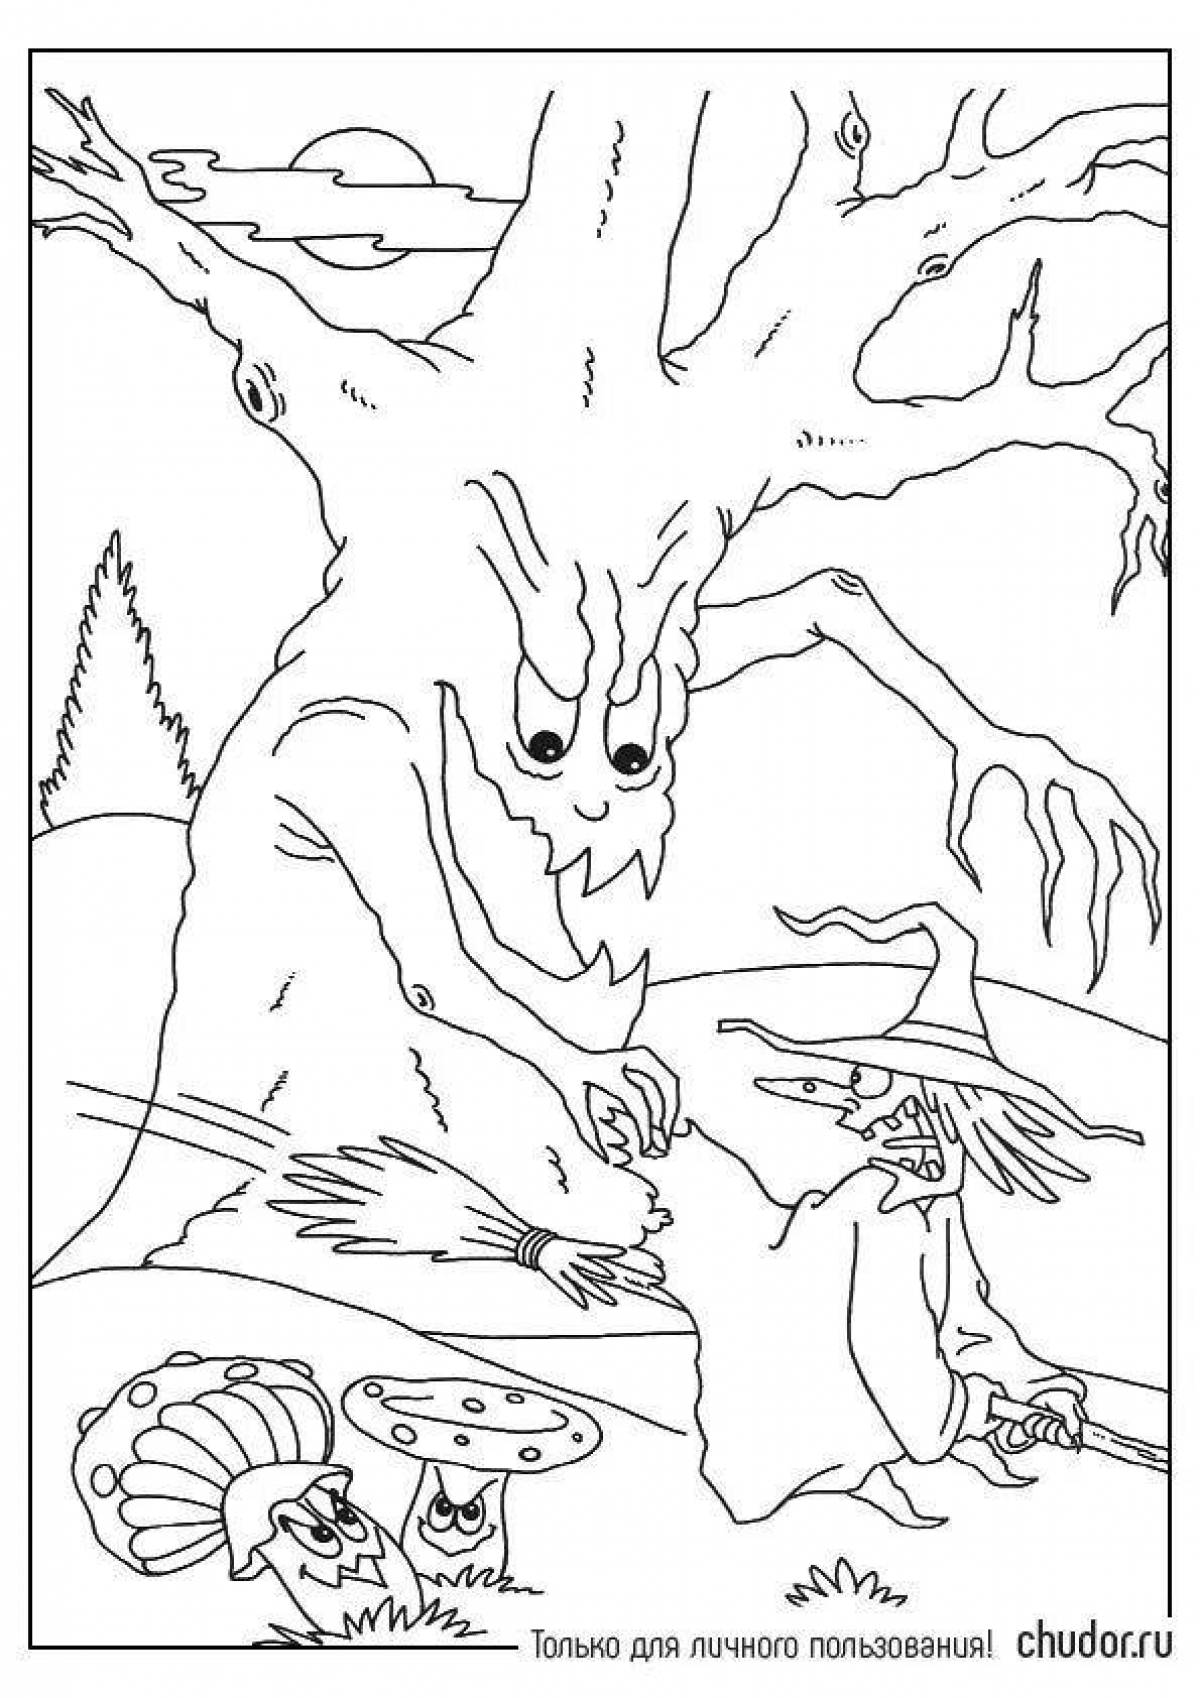 Shocking horror coloring pages for kids